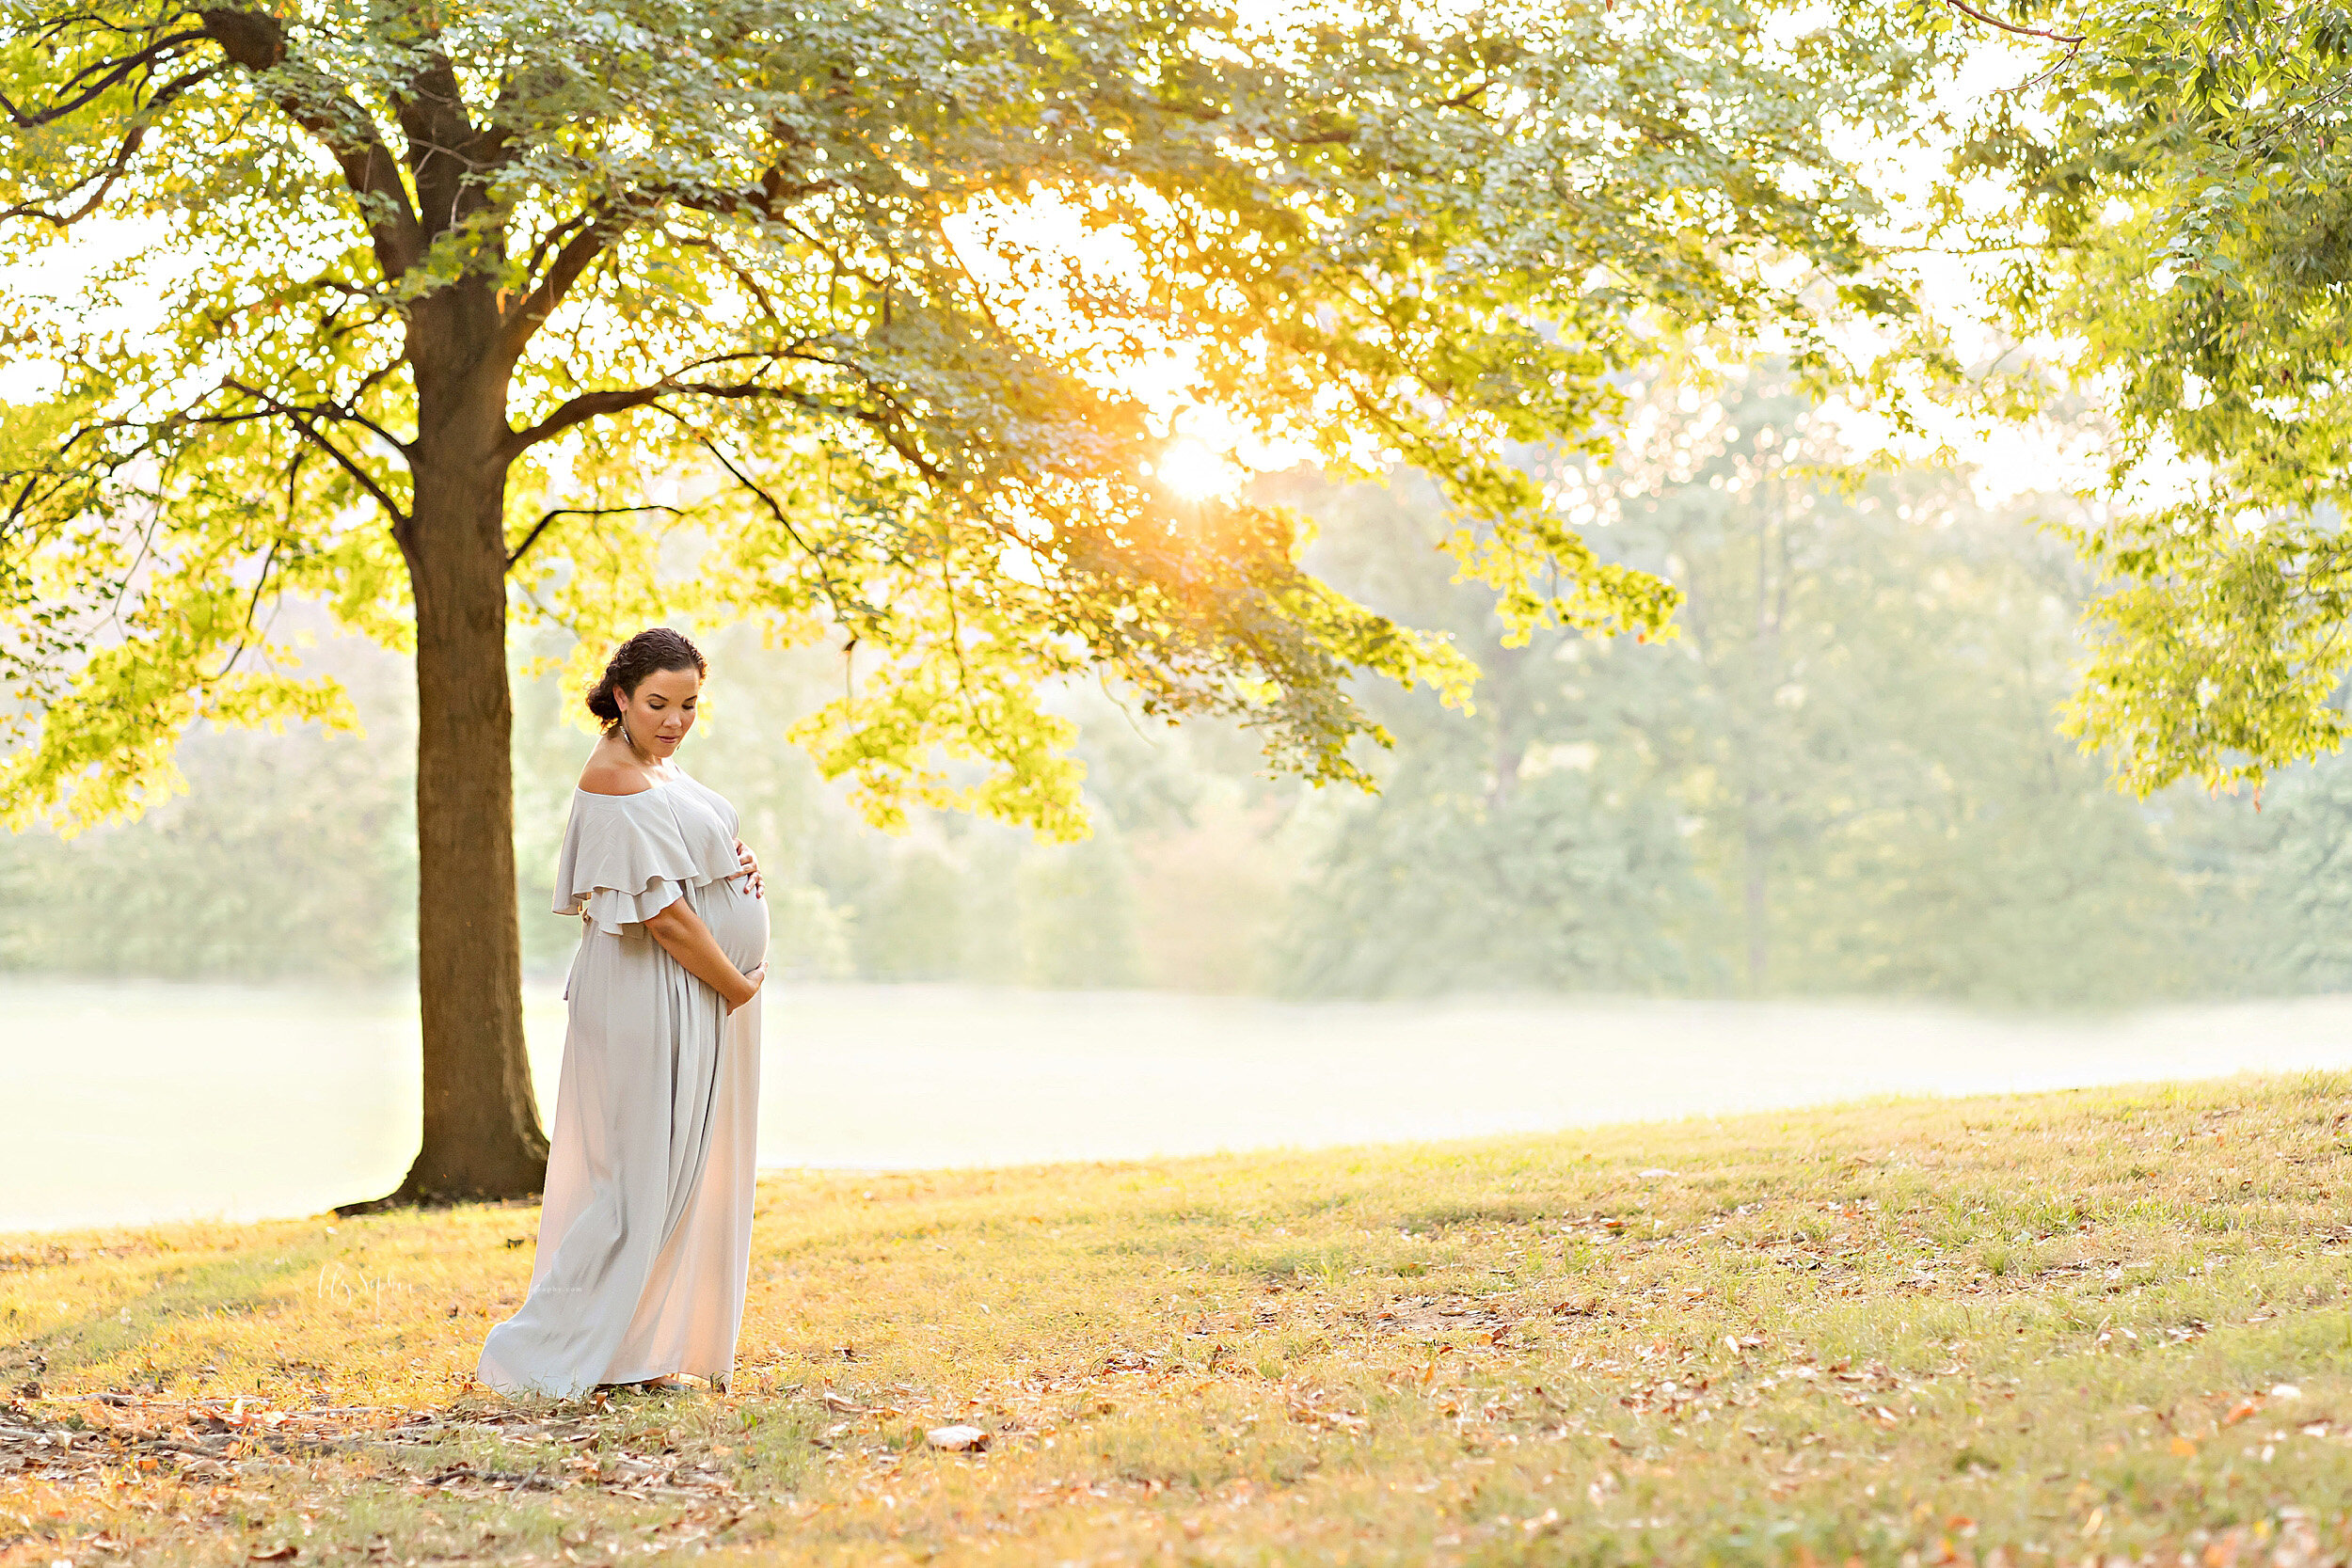 atlanta-decatur-old-fourth-ward-poncey-highlands-candler-park-grant-park-brookhaven-buckhead-virginia-highlands-west-end-decatur-lily-sophia-photography-family-maternity-park-session_2419.jpg